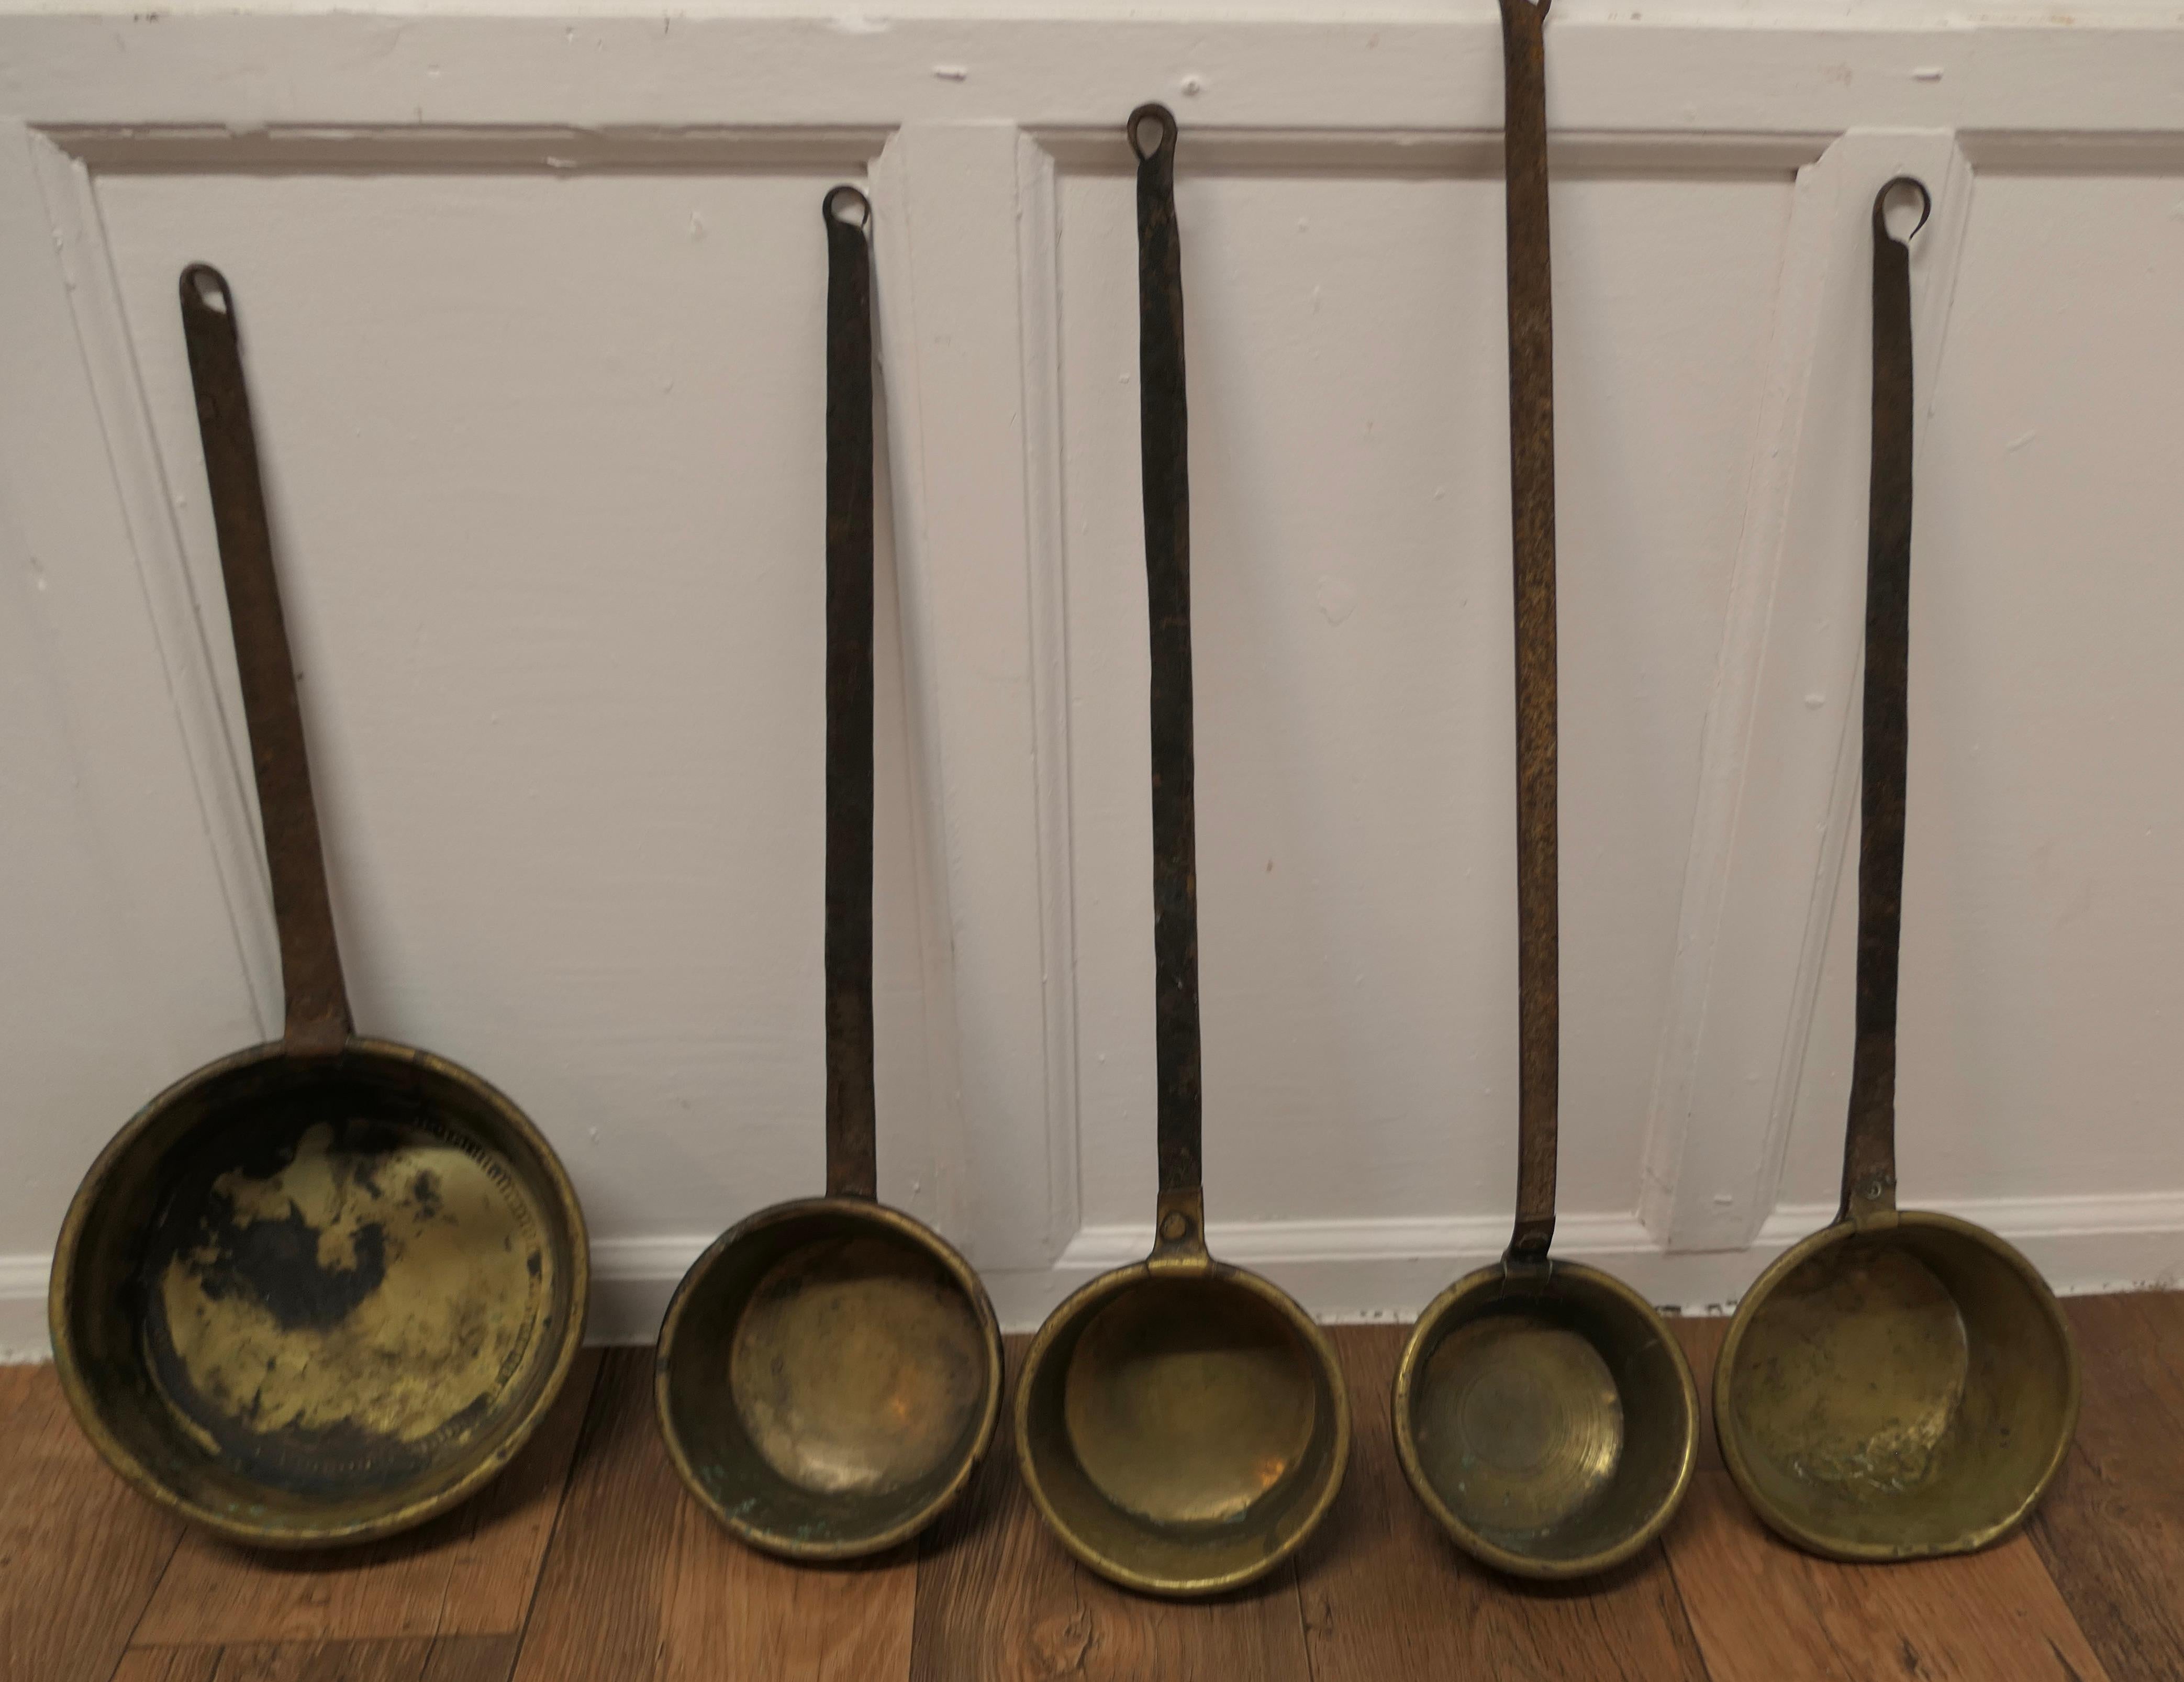 Set of Large 19th century Brass and Iron Ladles

A great set, 5 large long handle ladles, in Brass with long iron handles and in good used condition
The ladles are 25” long, the bowl of the largest one is 10” in diameter 
MS185.